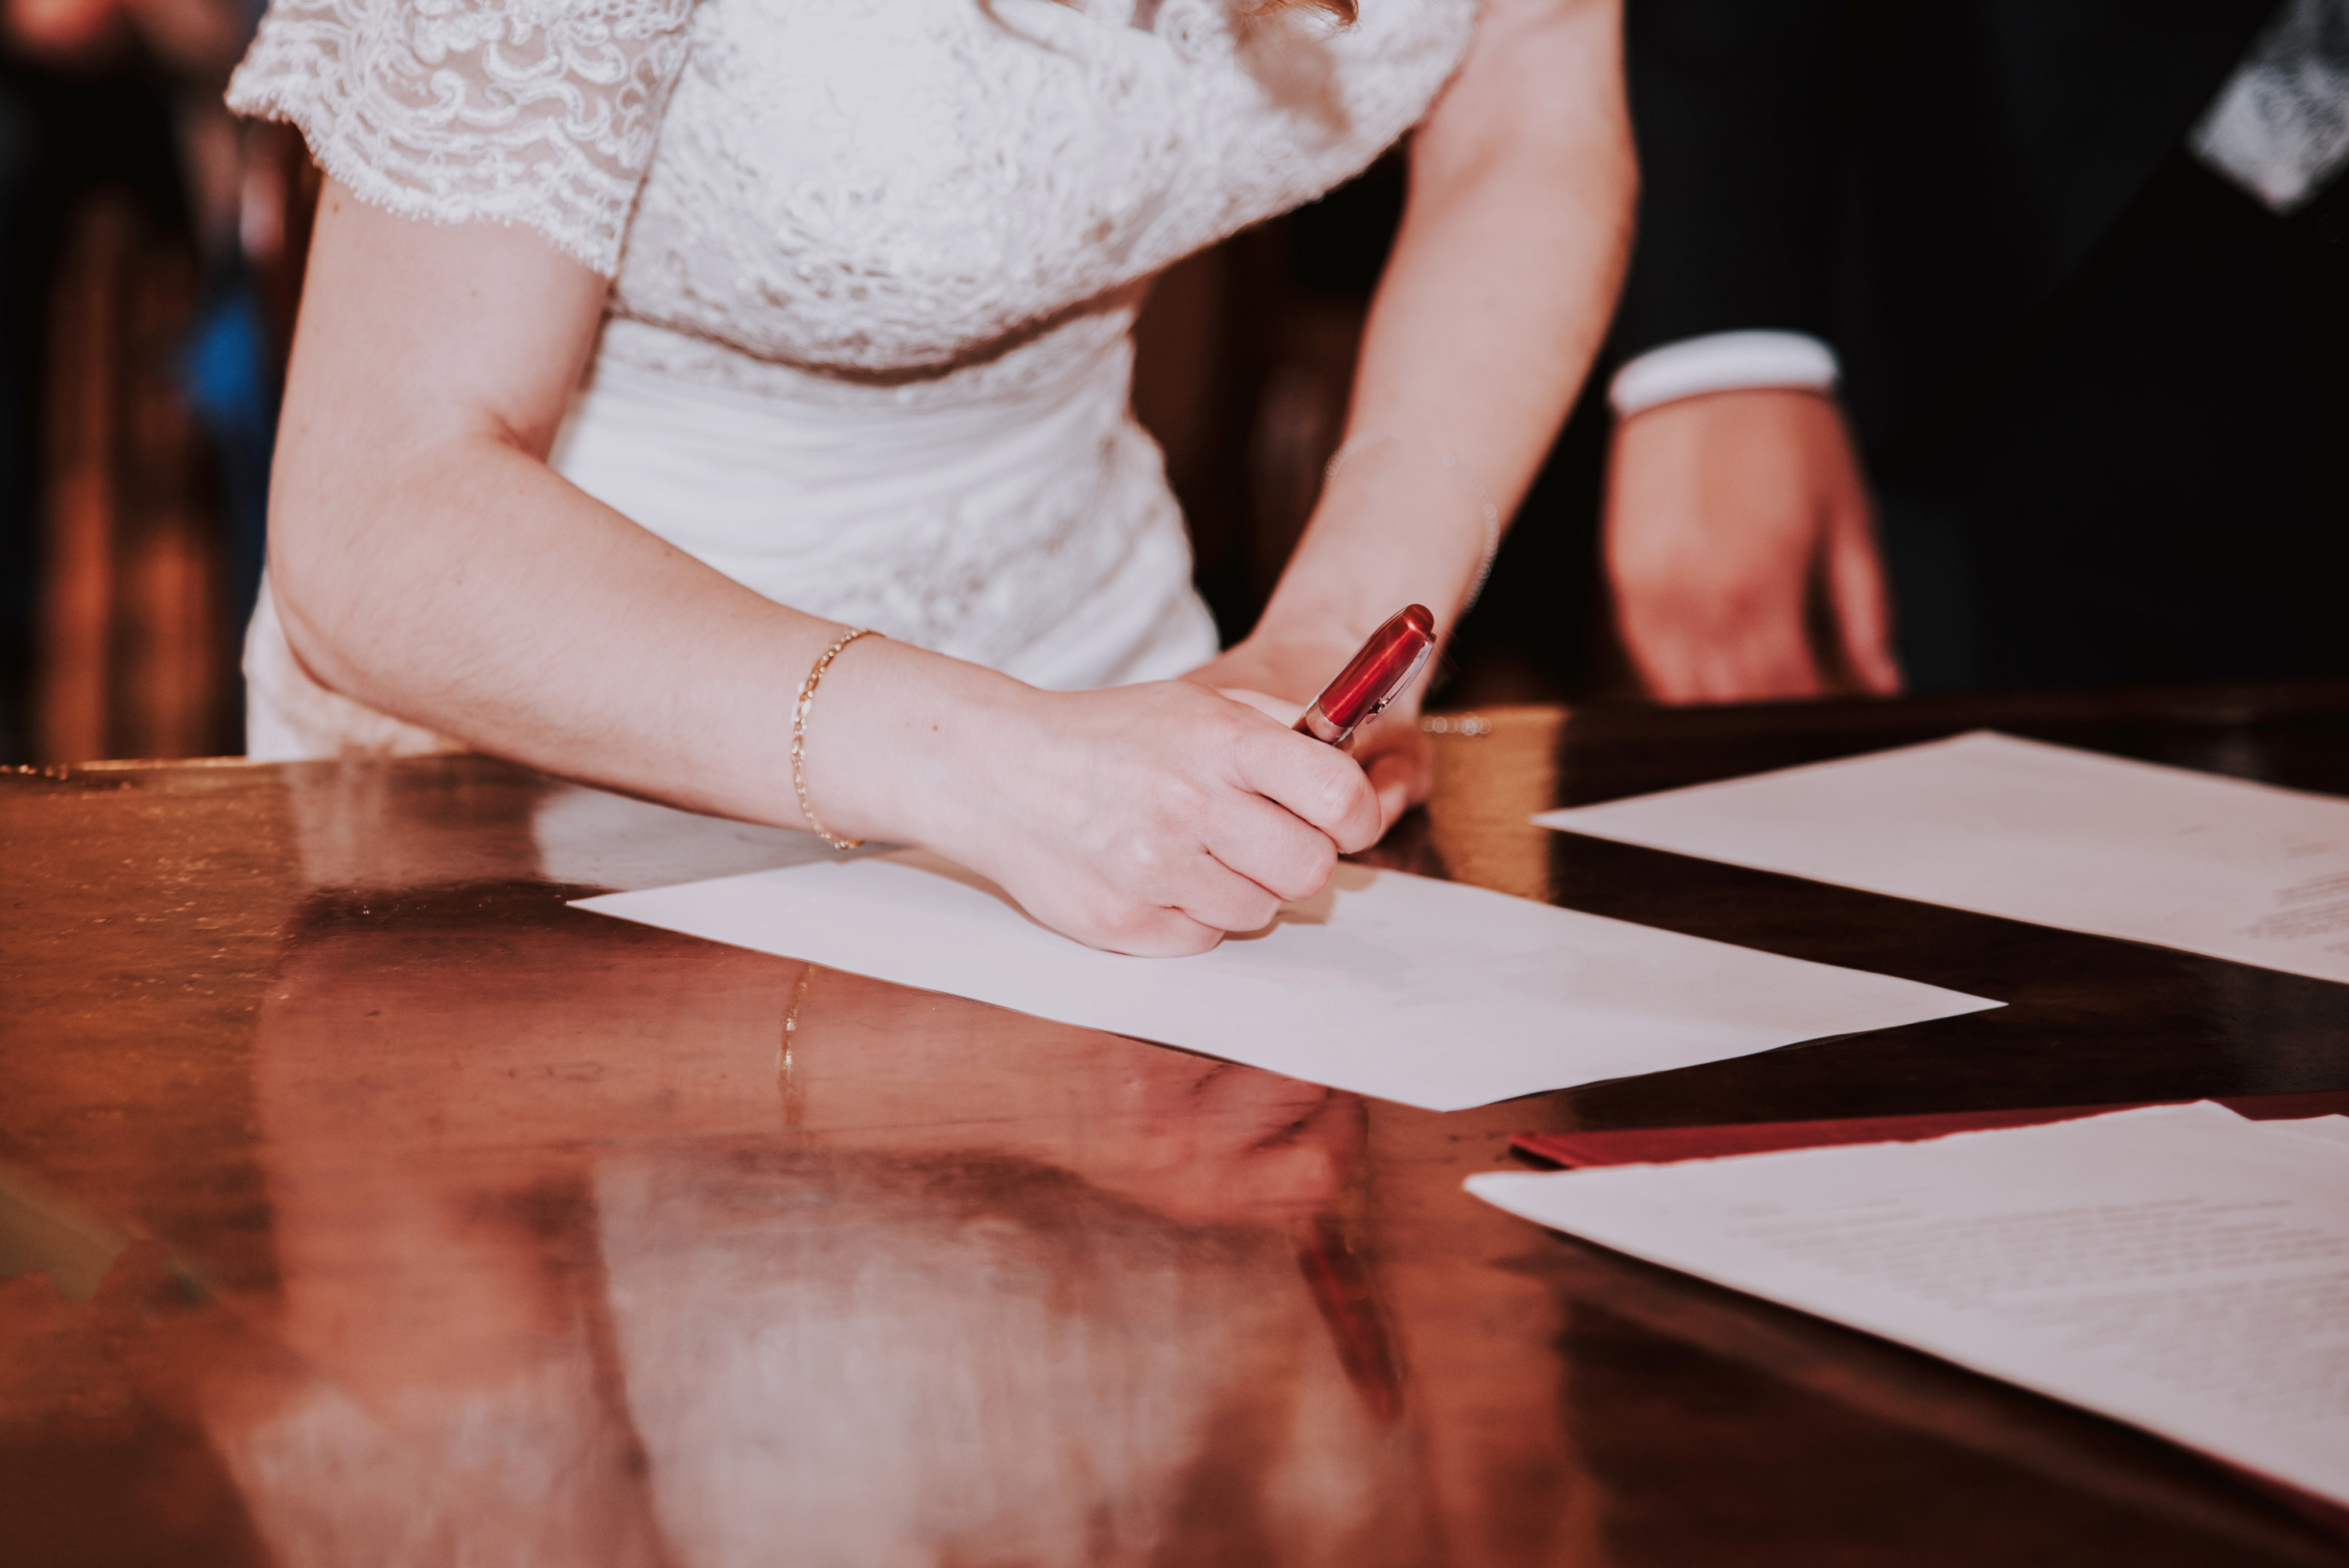 A bride signs wedding papers alongside a groom